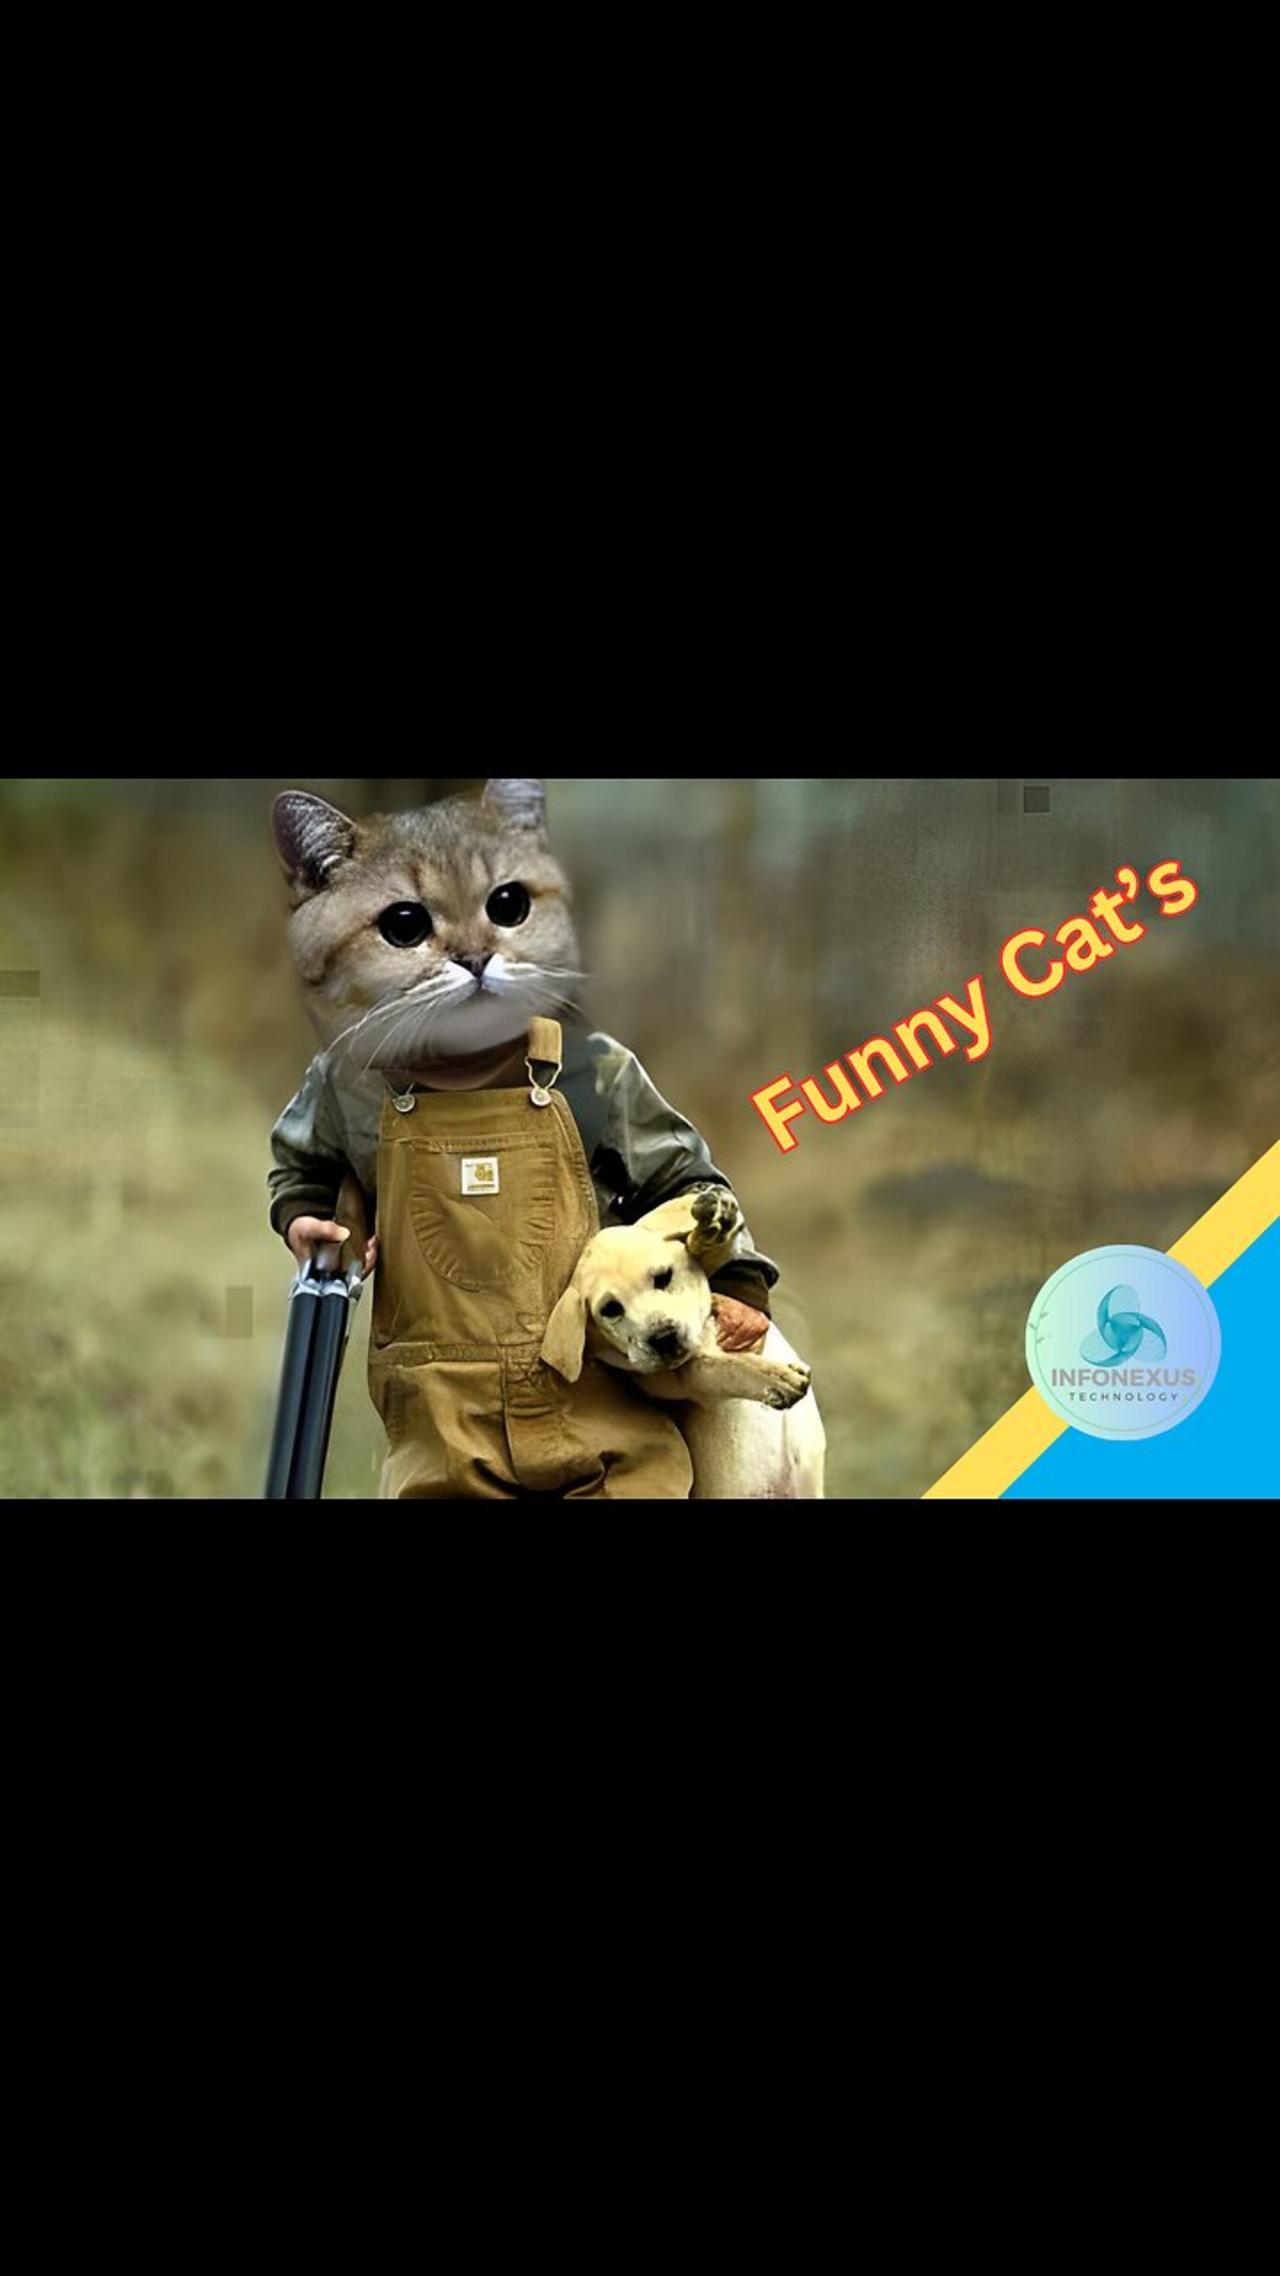 "2023's Funniest and Cutest Animal Videos: Cats, Dogs, and More! 🐱🐶😂"